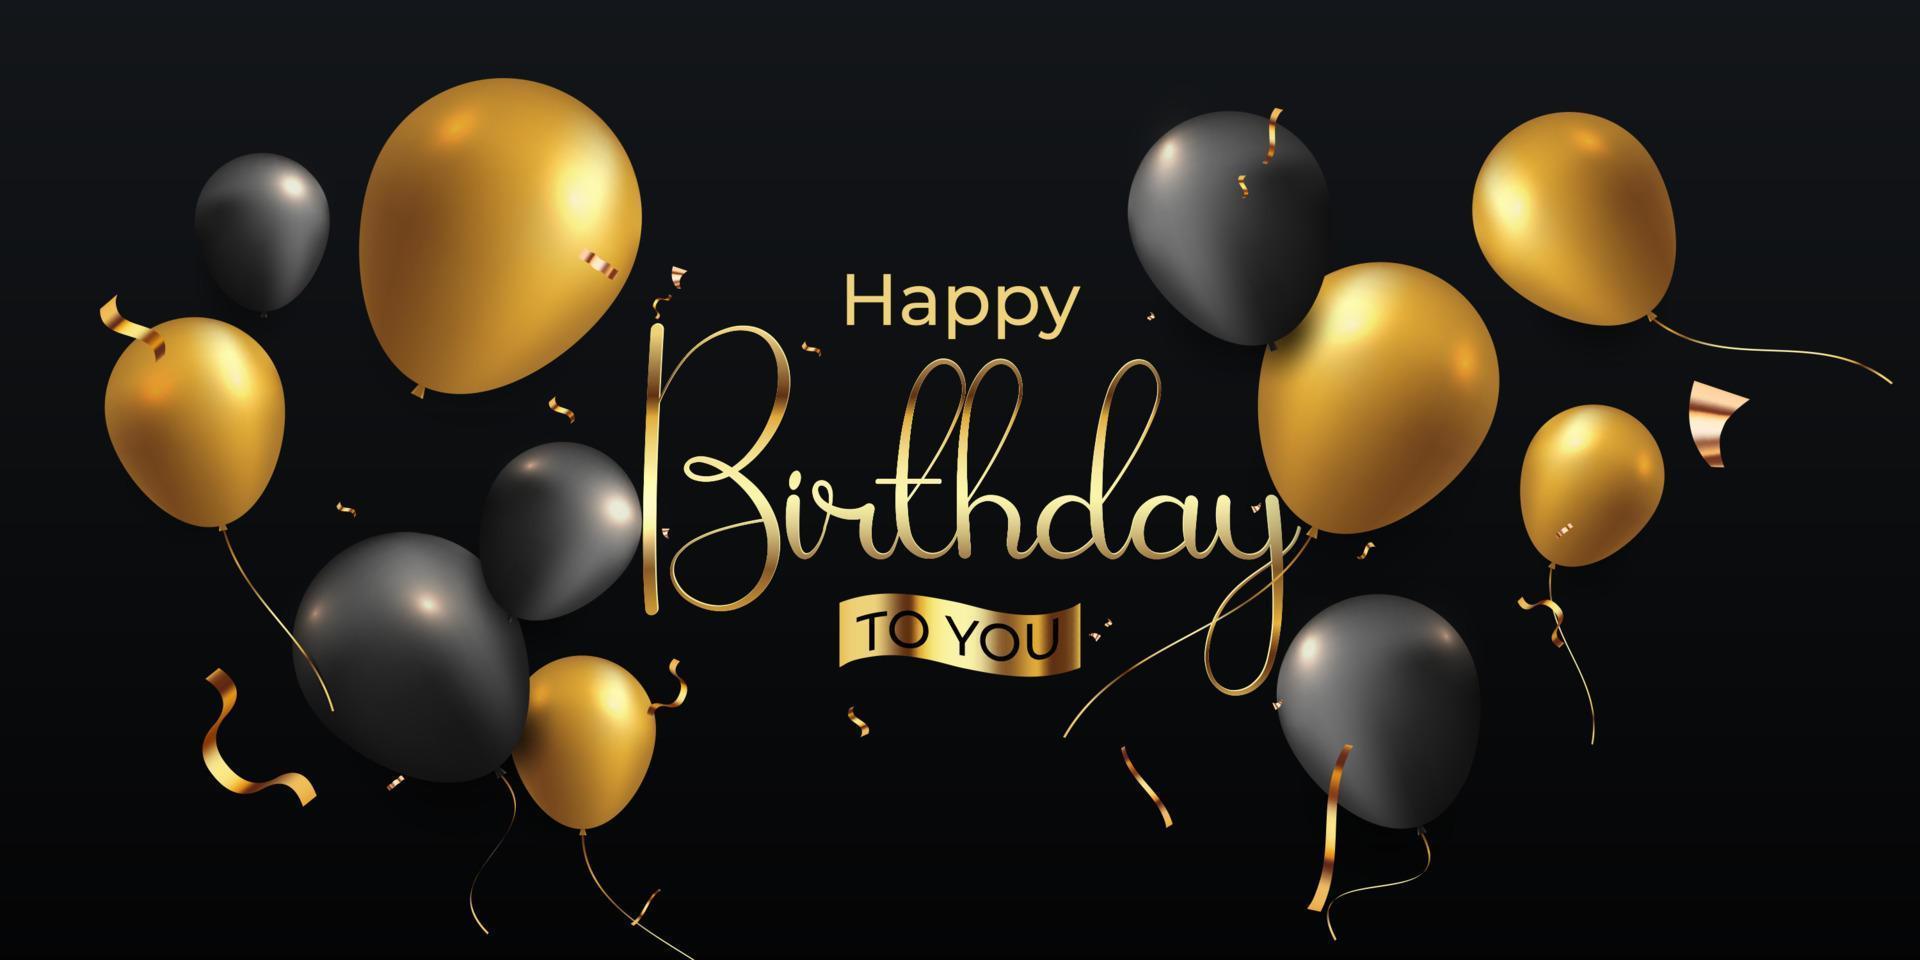 Happy birthday black and gold background with realistic 3d floating balloons and ribbon vector